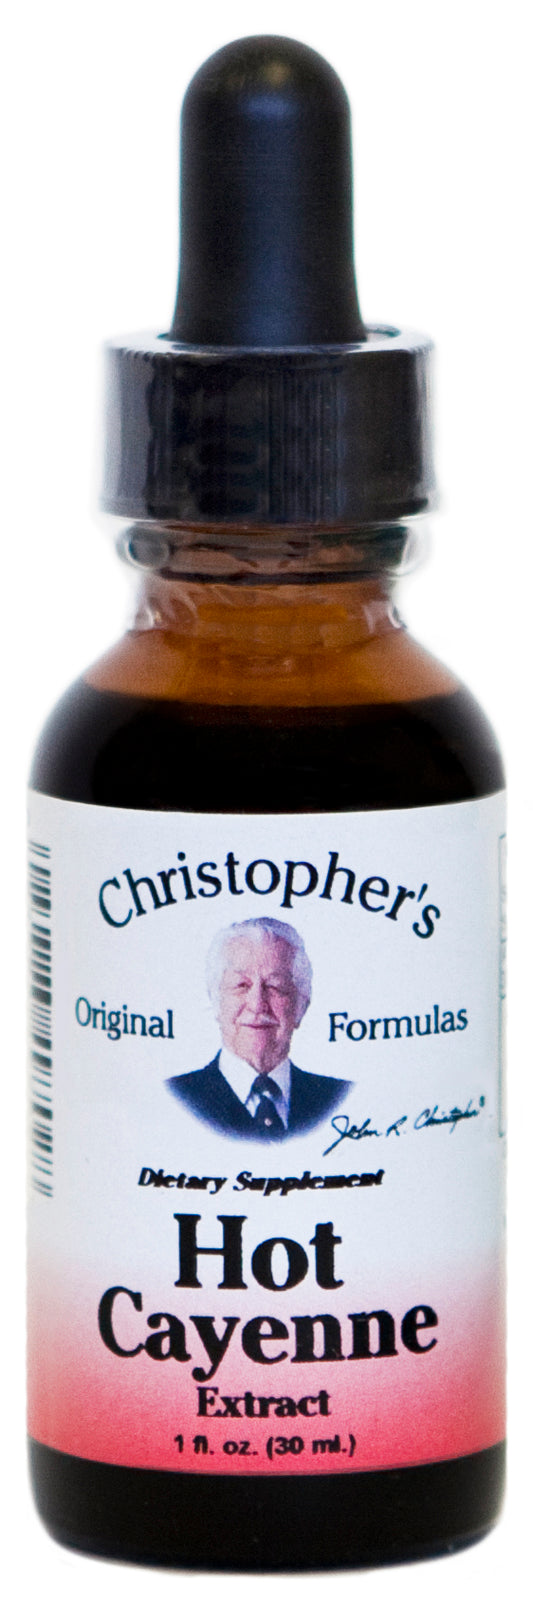 Dr. Christopher's Cayenne Pepper 200MHU Alcohol Extract 1oz